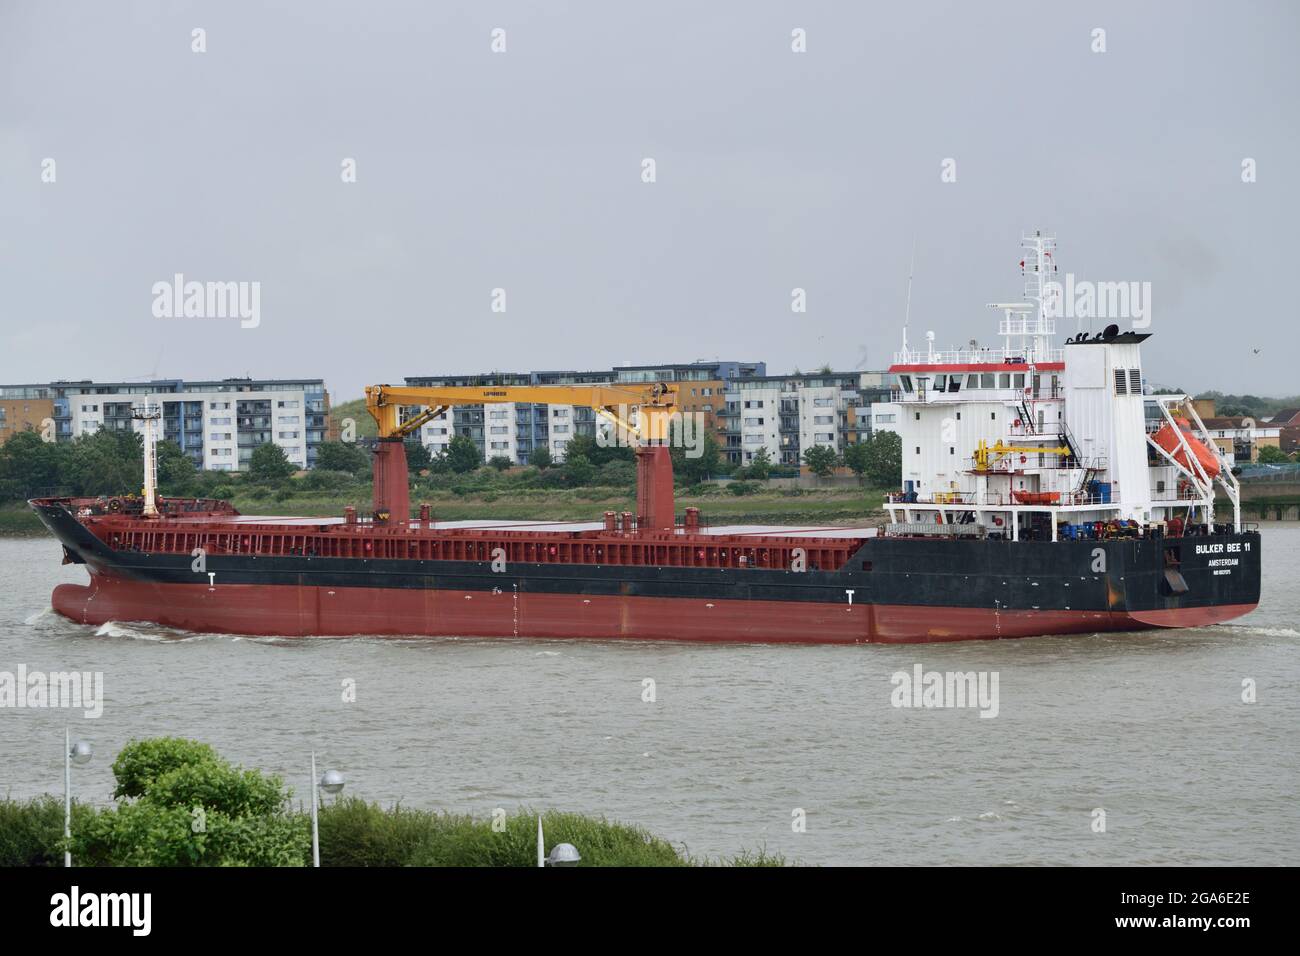 Cargo ship BULKER BEE 11 departing London after unloading a cargo of cane sugar at Tate & Lyle Sugar's Thames Refinery at Silvertown Stock Photo